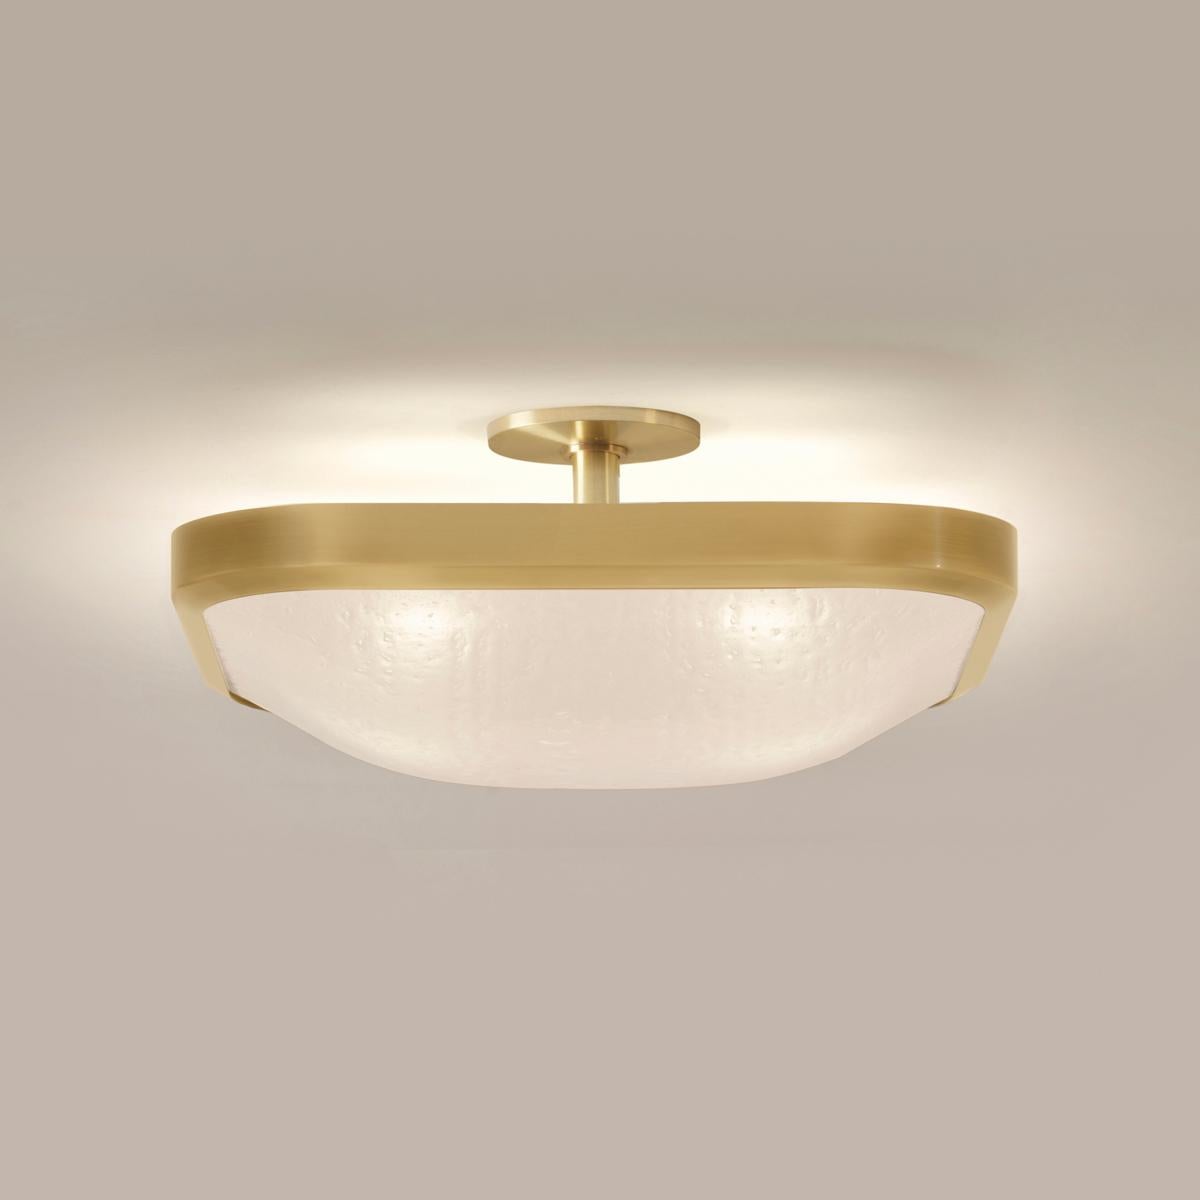 The Uno Square ceiling light exemplifies simple elegance via its clean profile designed around a single Murano glass shade.

Shown in the primary images in satin brass-subsequent pictures show the fixture in other featured finishes.

Starting at $